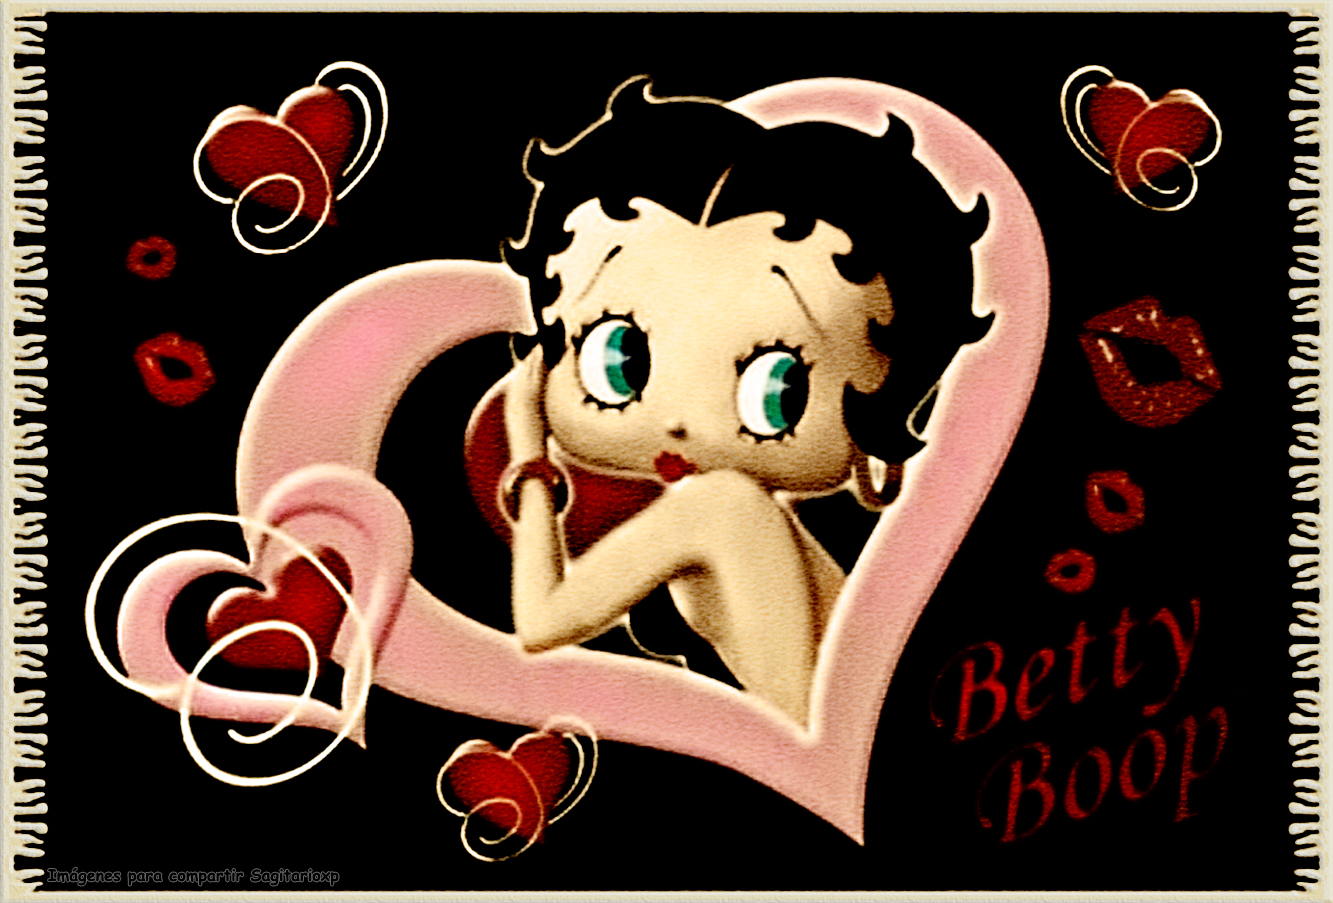 Wa11papers Top Betty Boop Wallpaper For Phone